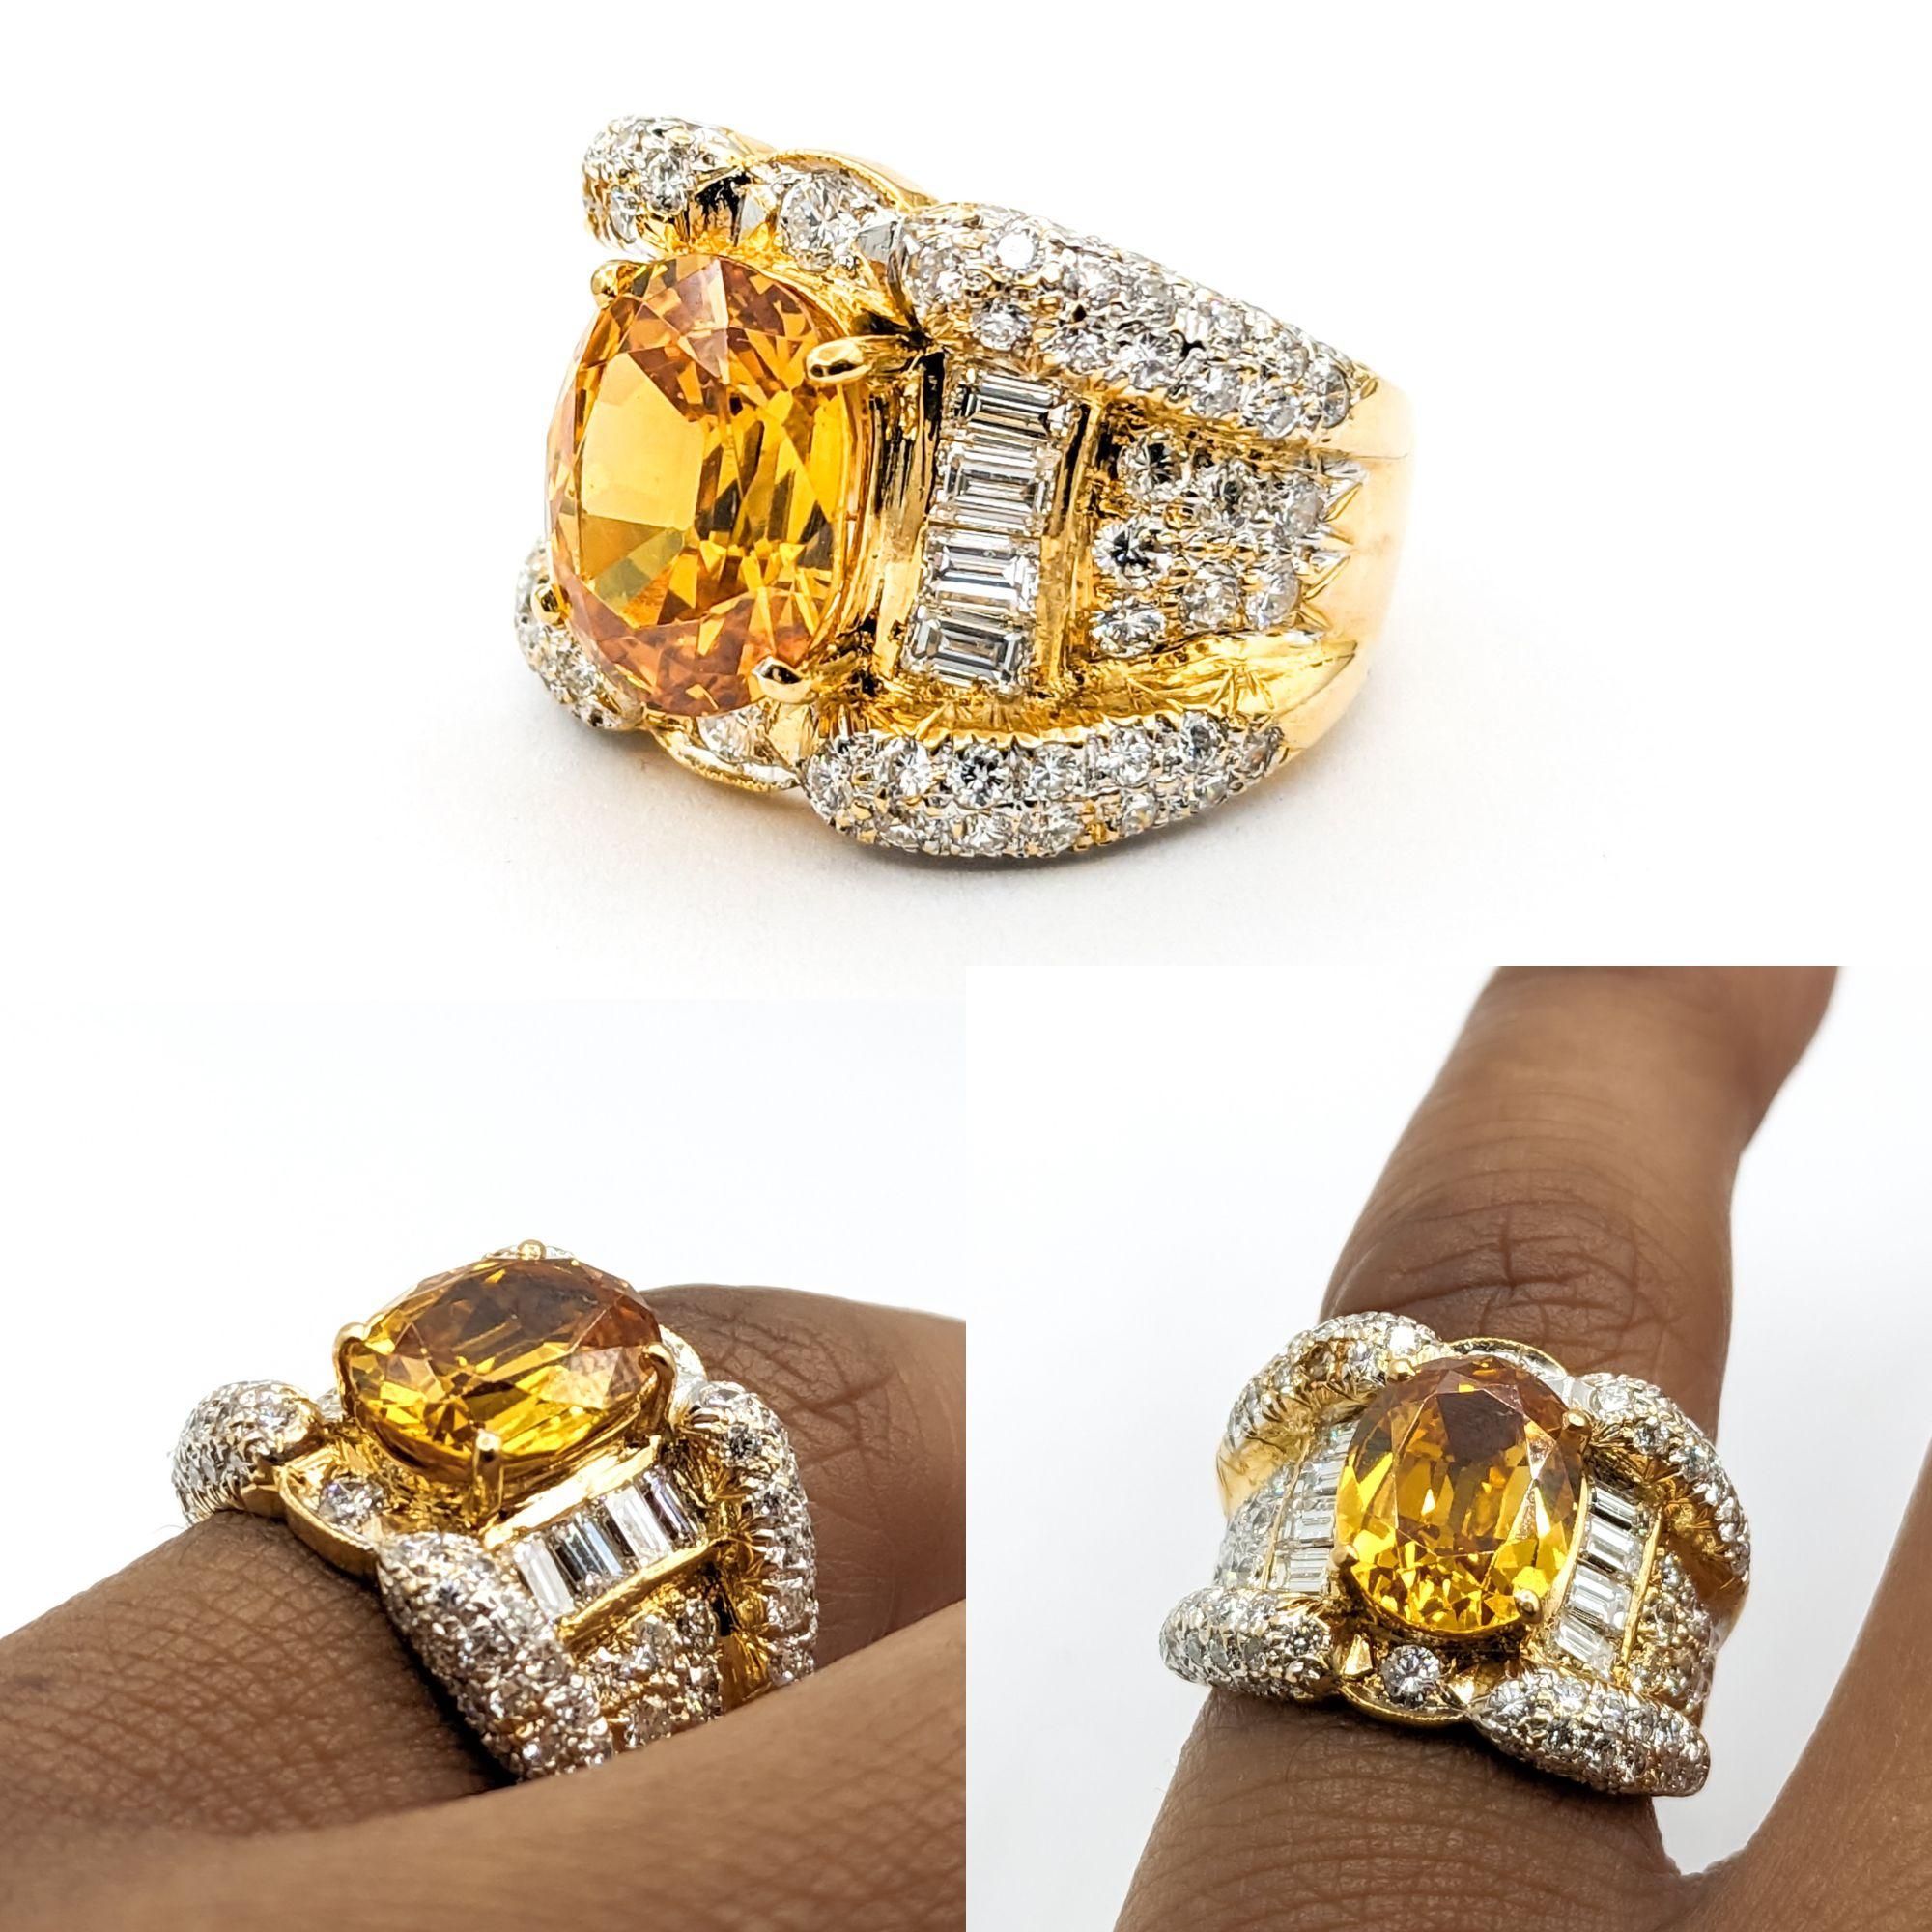 Citrine & Diamond Ring In Yellow Gold

This unique Citrine ring is expertly crafted in 18k yellow gold and showcases a captivating 9.8x7.8mm citrine with a saturated yellow hue. Further enhancing this gemstone are .70ctw of round and baguette